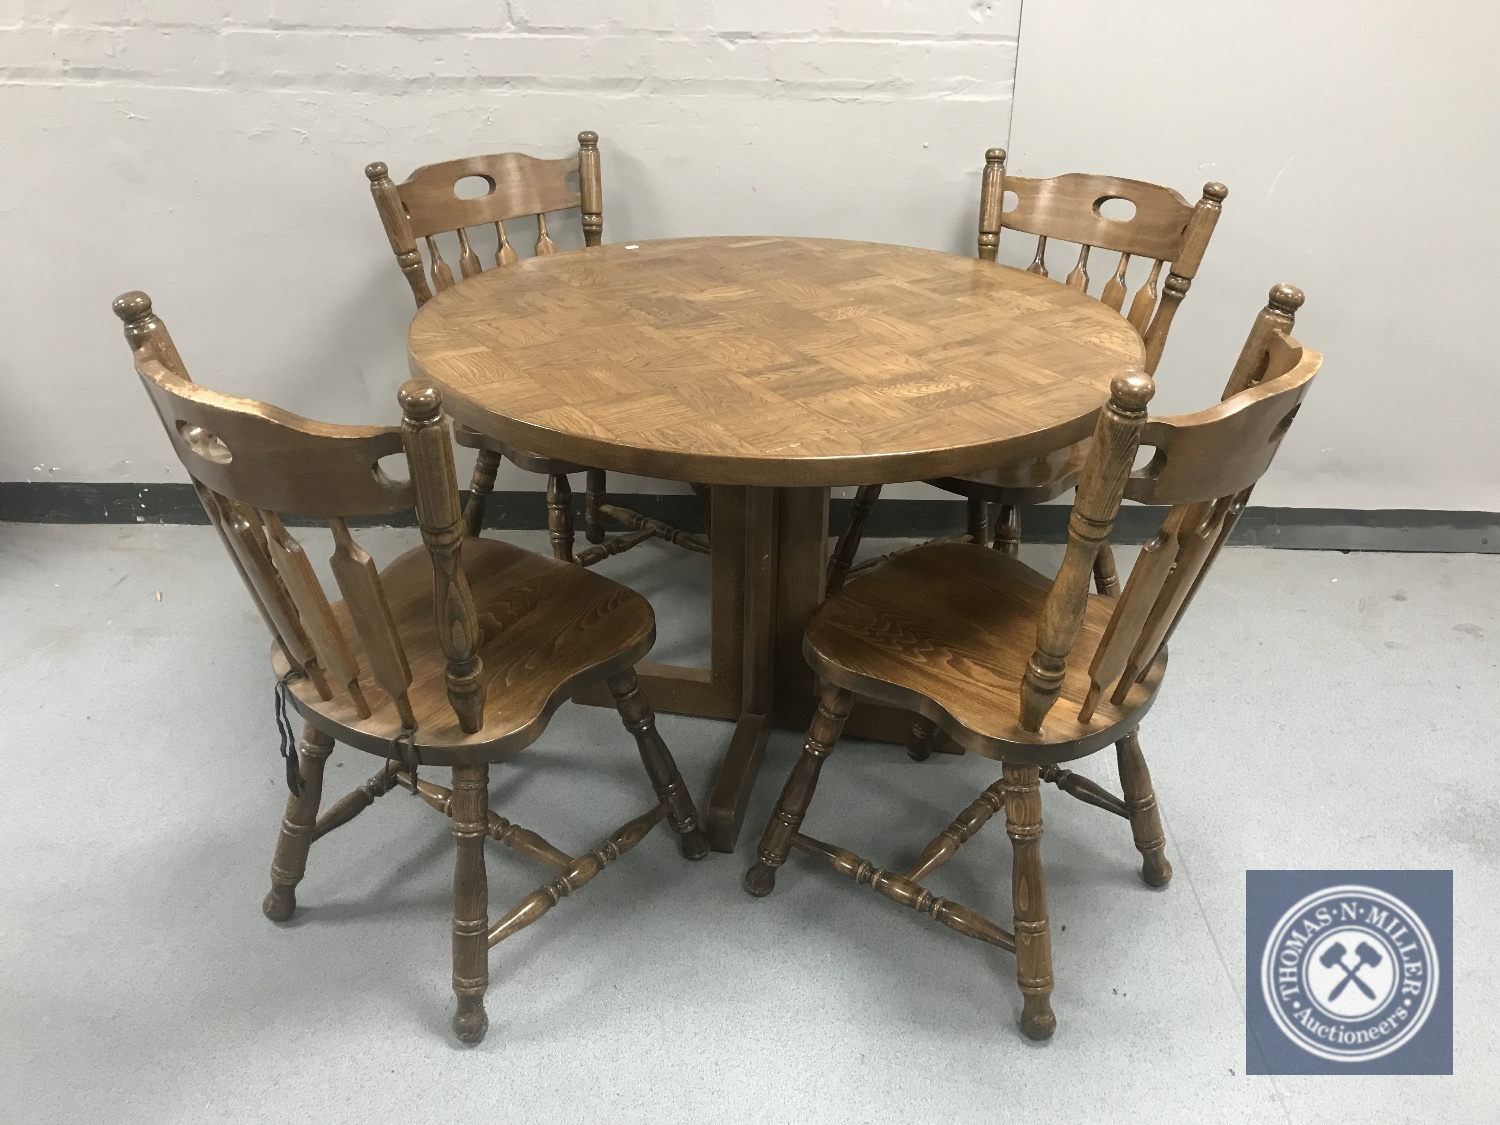 A circular oak pedestal kitchen table together with four chairs